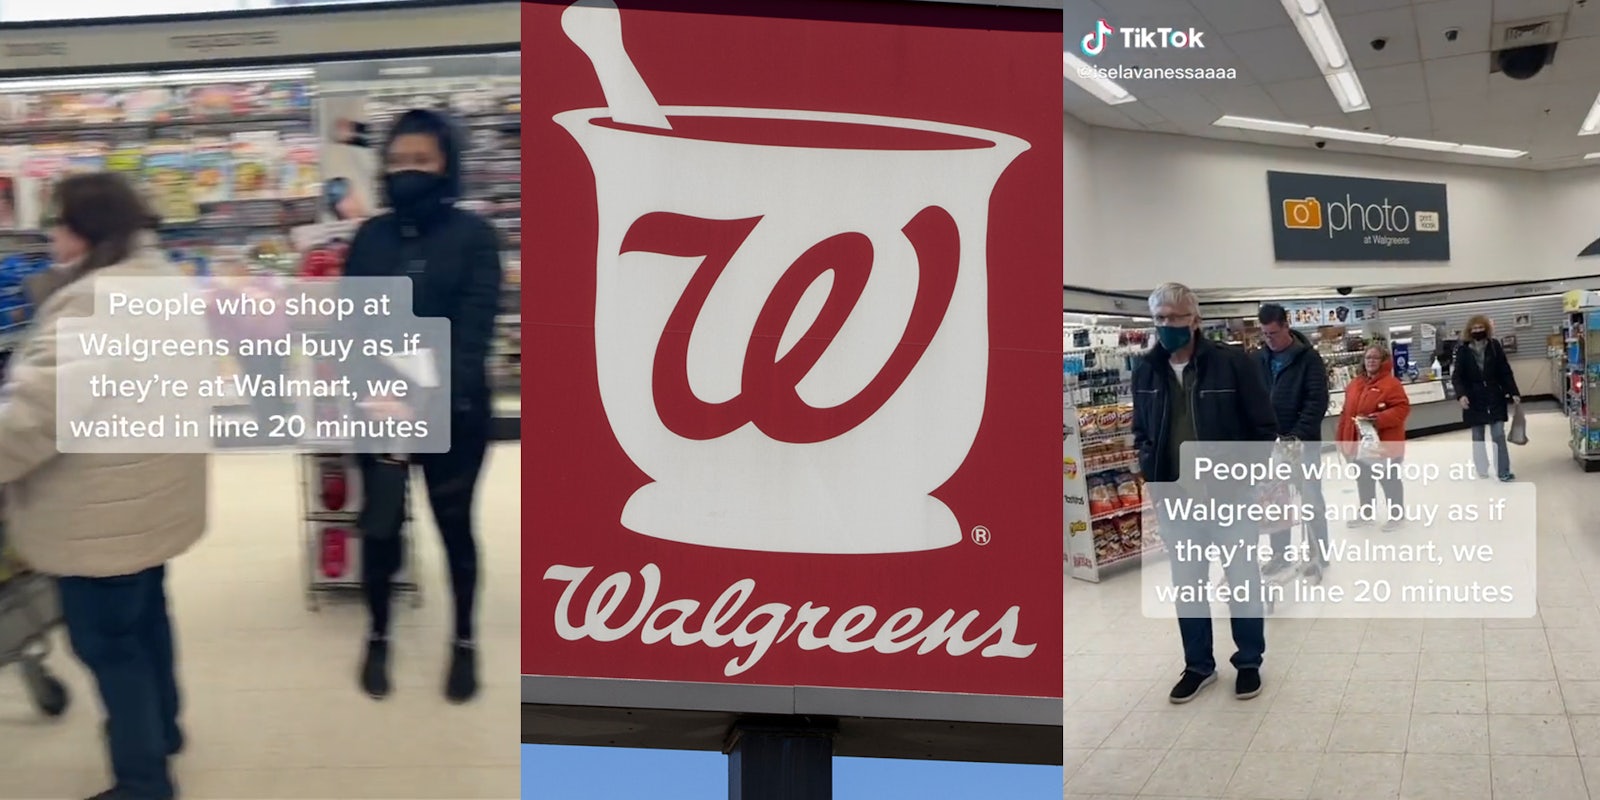 people standing in line at walgreens with caption 'People who shop at Walgreens and buy as if they're at Walmart, we waited in line 20 minutes'